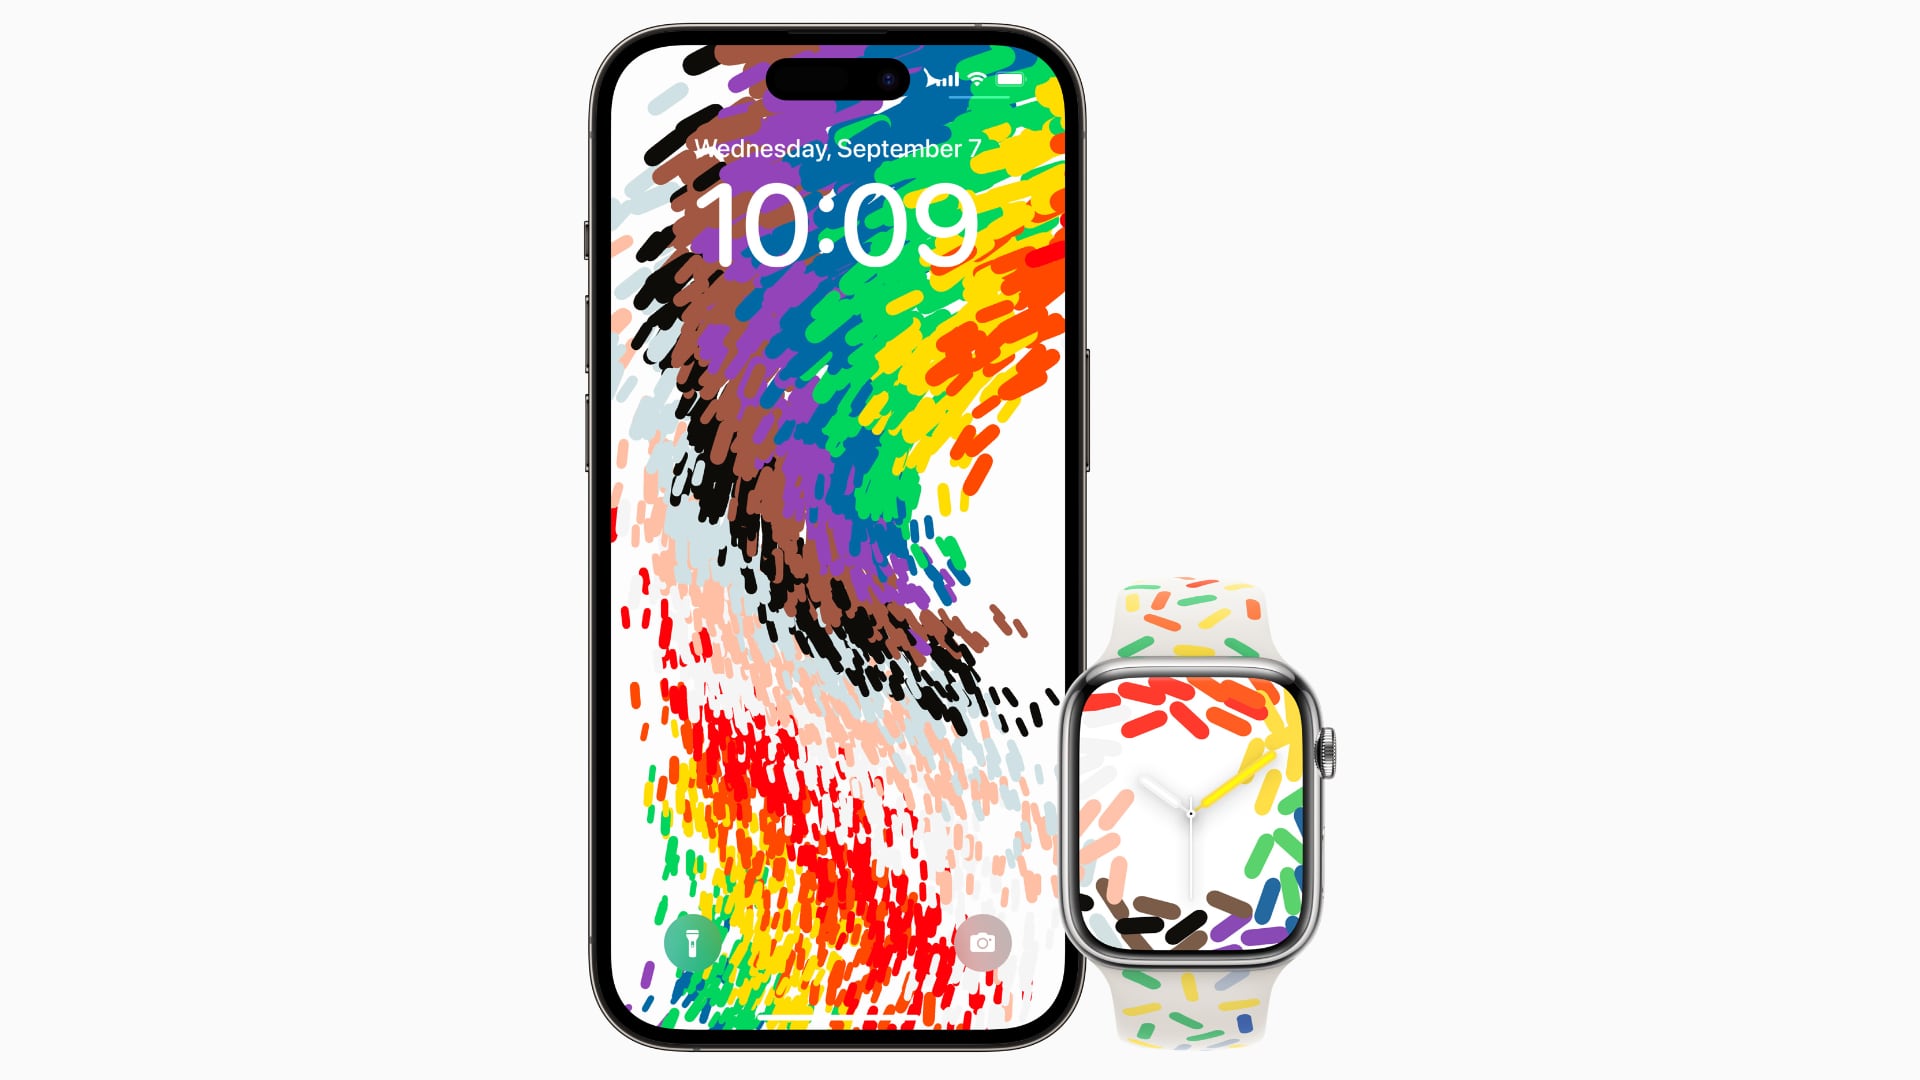 Pride Edition 2023 wallpaper on Apple Watch and iPhone